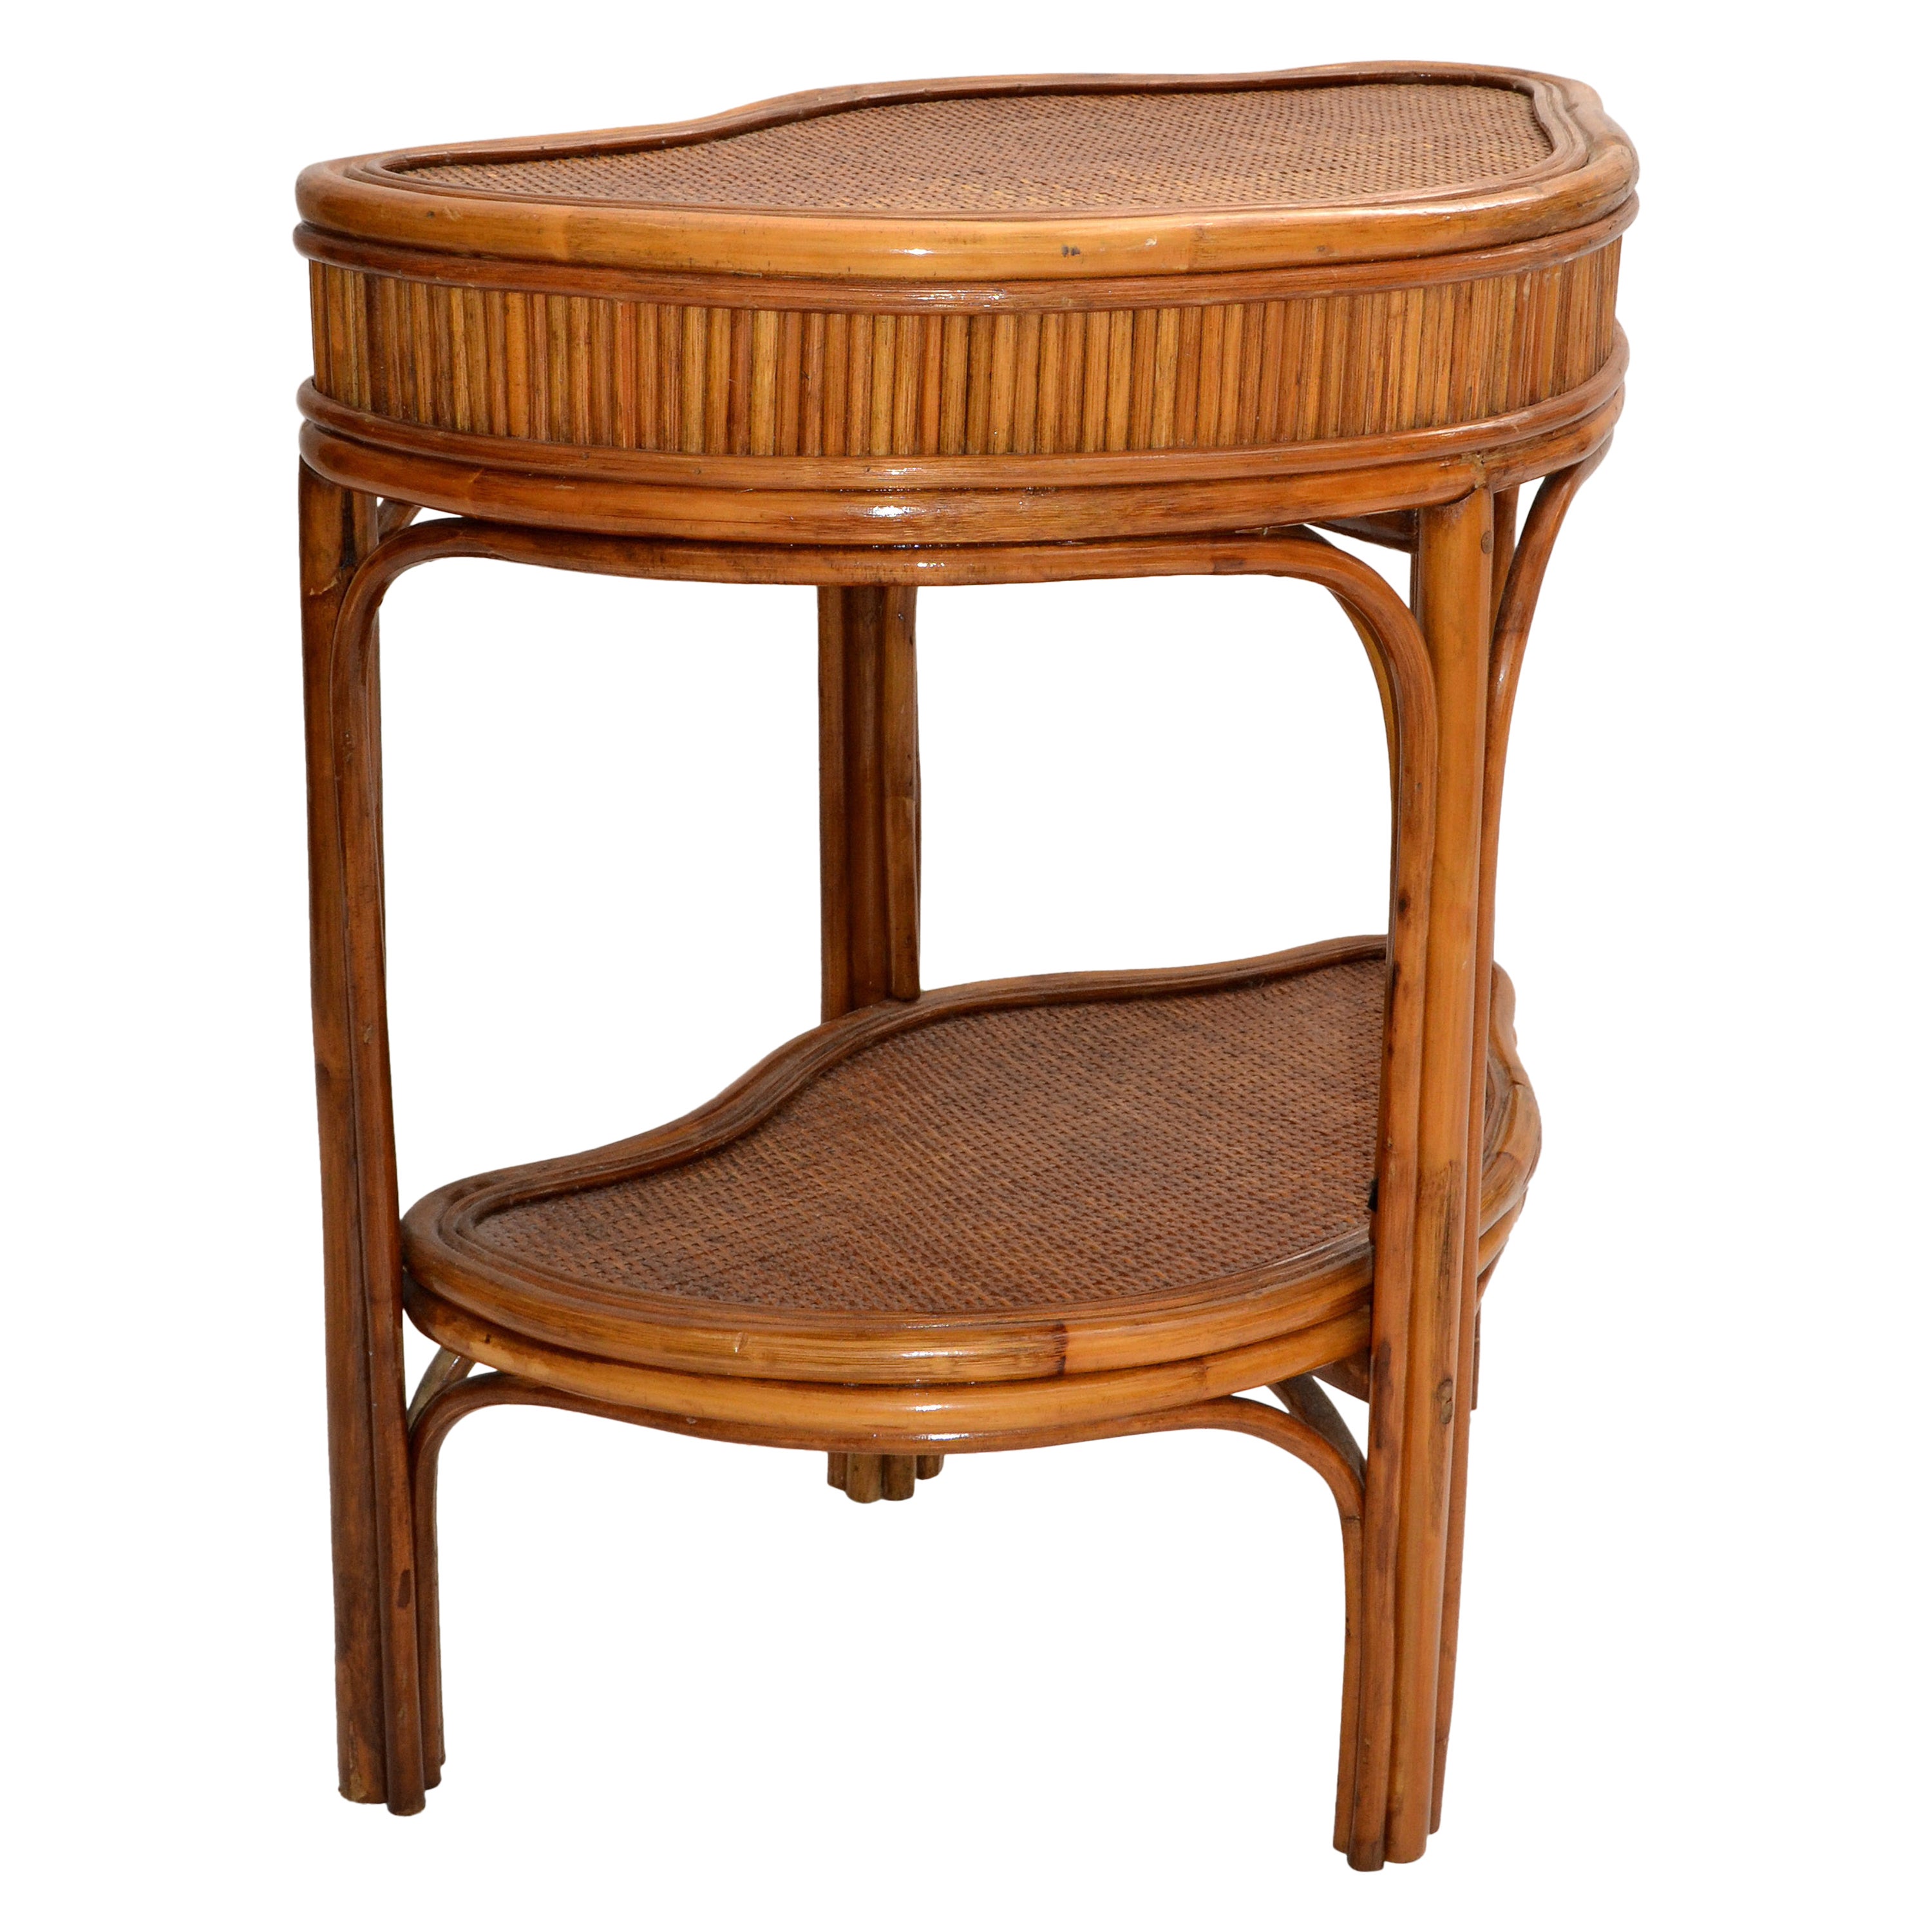 Chinoiserie Bamboo & Rattan Handmade Two-Tier Side, End Table Asian Modern 70s